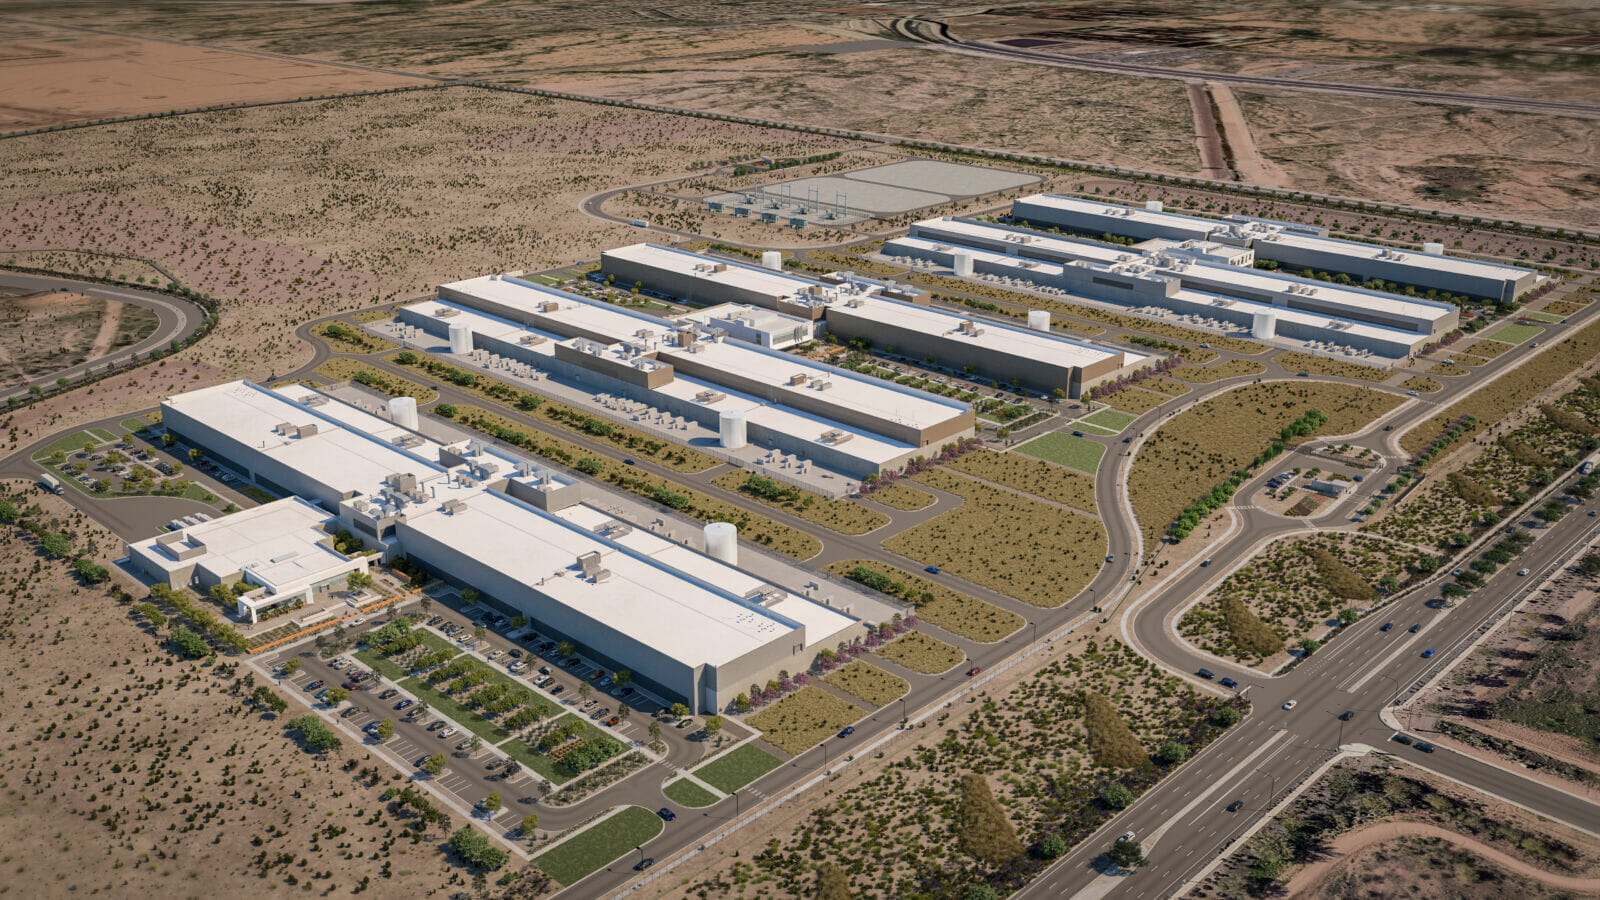 Meta and DPR Construction have partnered to bring the tech company's skilled trades training program to the Meta Mesa Data Center.